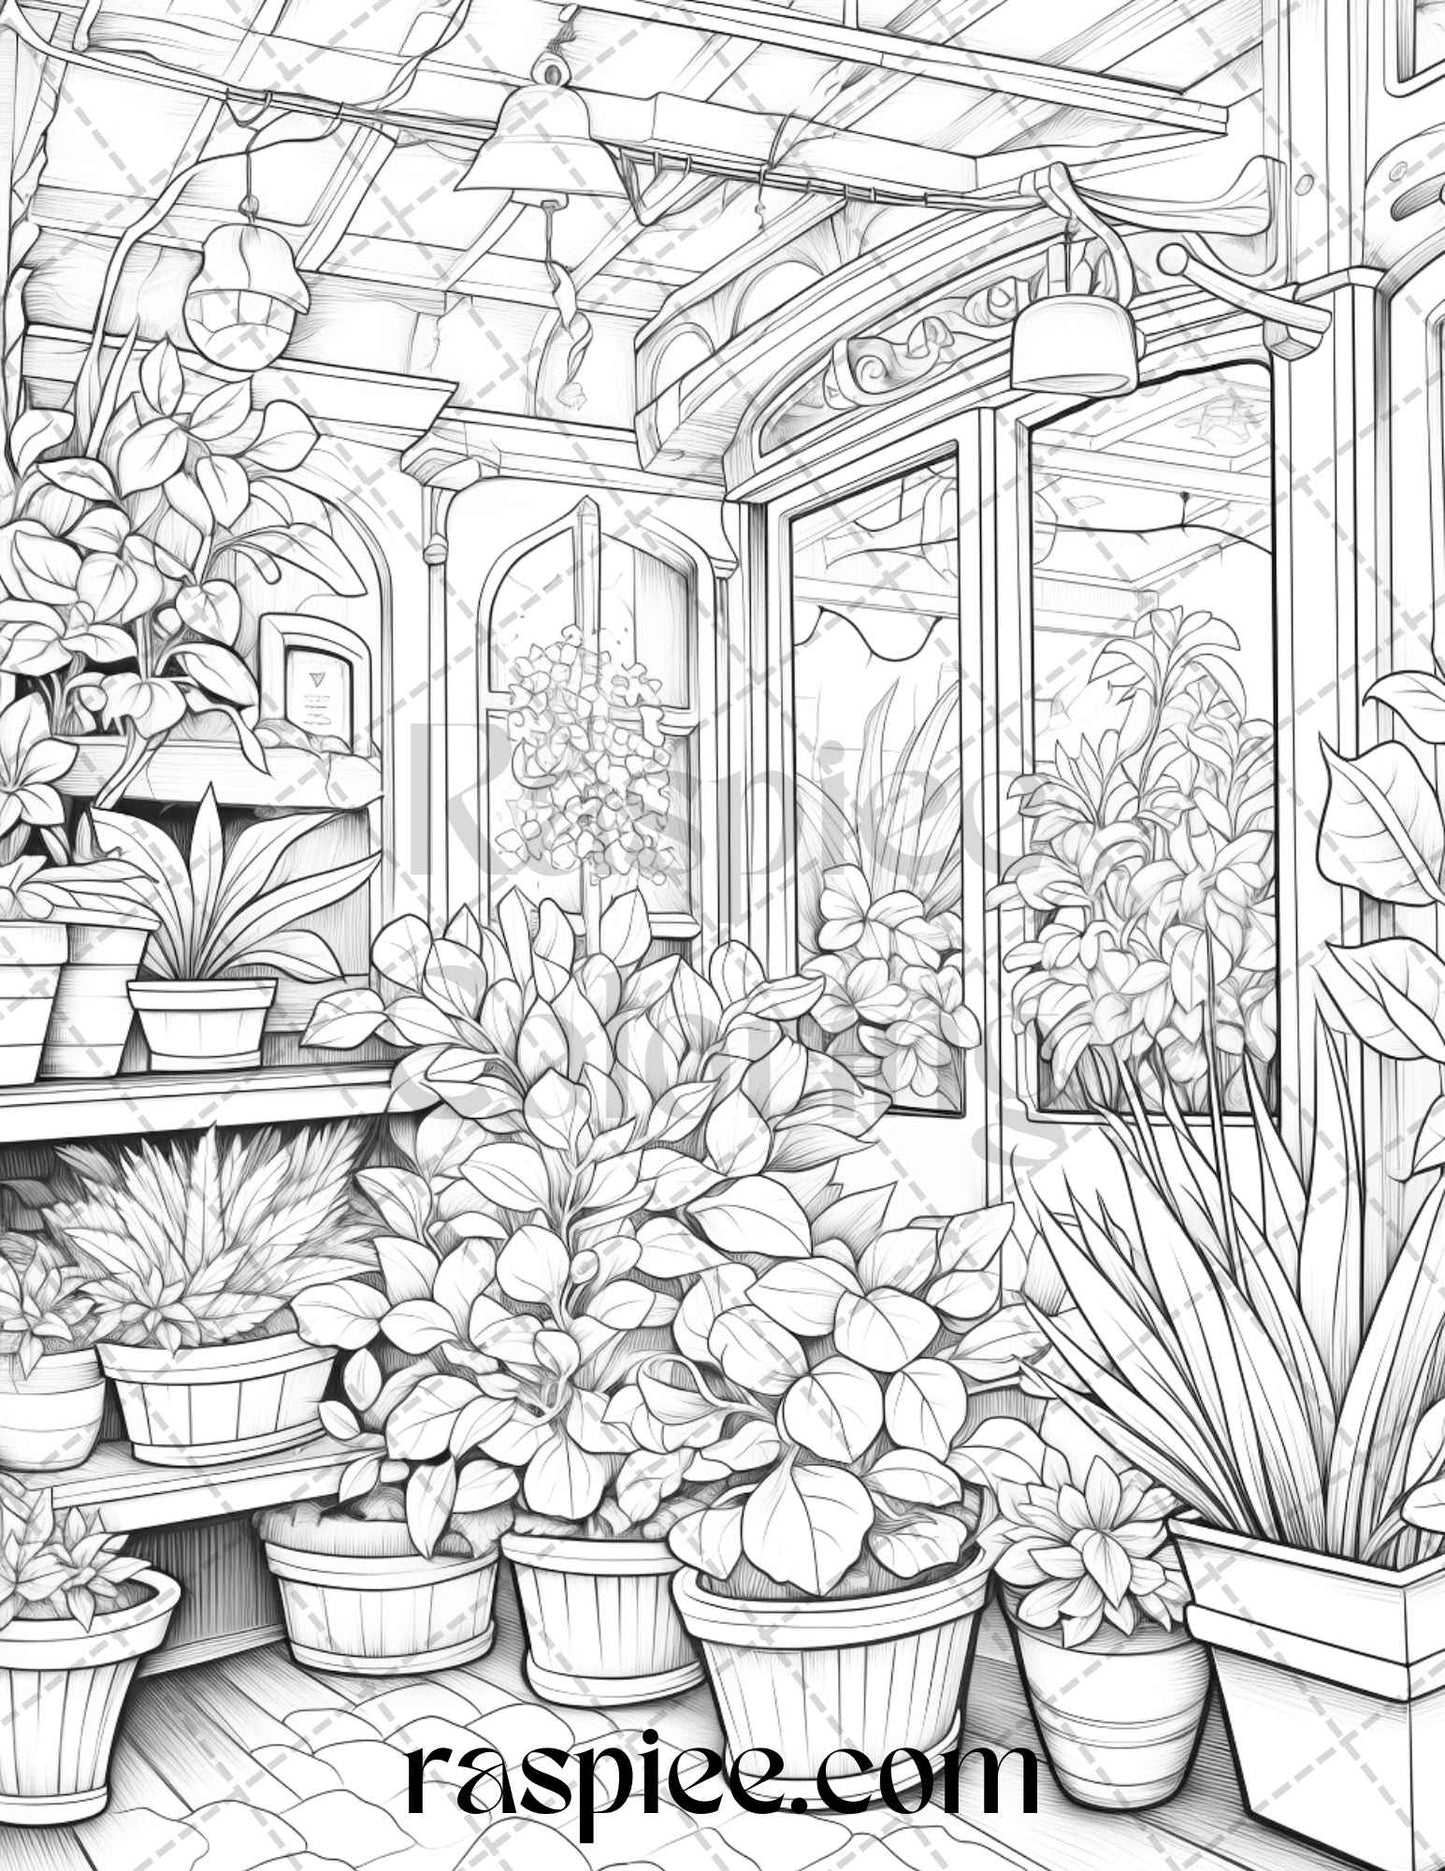 flower store front grayscale coloring pages, printable coloring pages for adults, grayscale art therapy, relaxing flower coloring pages